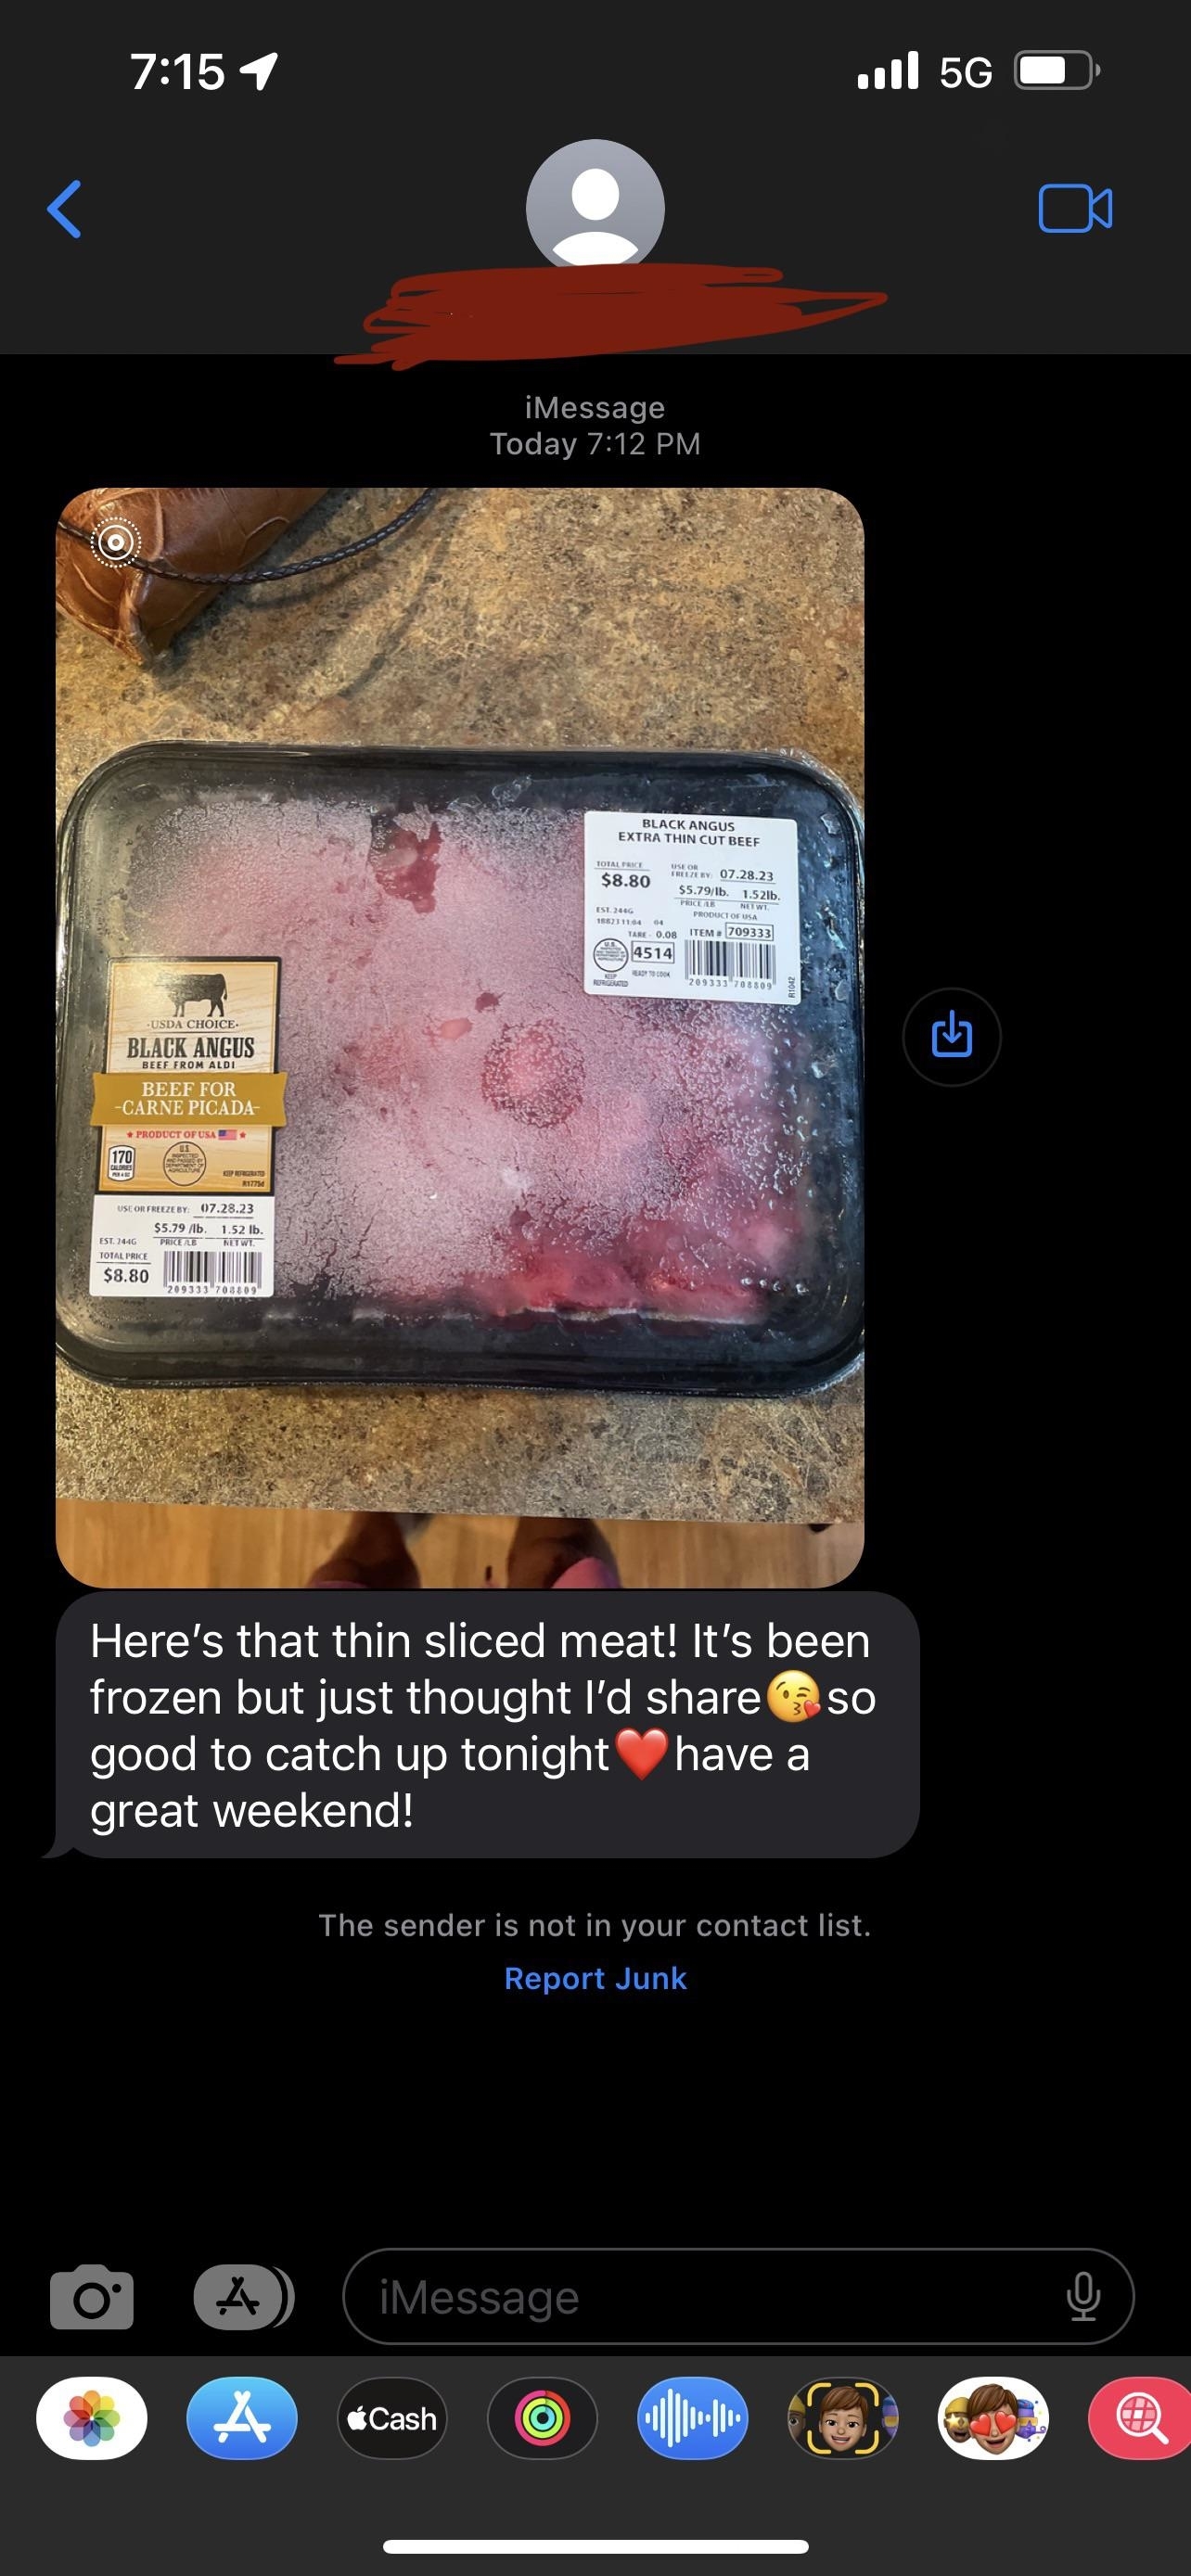 Text message screenshot showing a conversation about meat. The sender shares an image of a pack of frozen Black Angus thin sliced beef